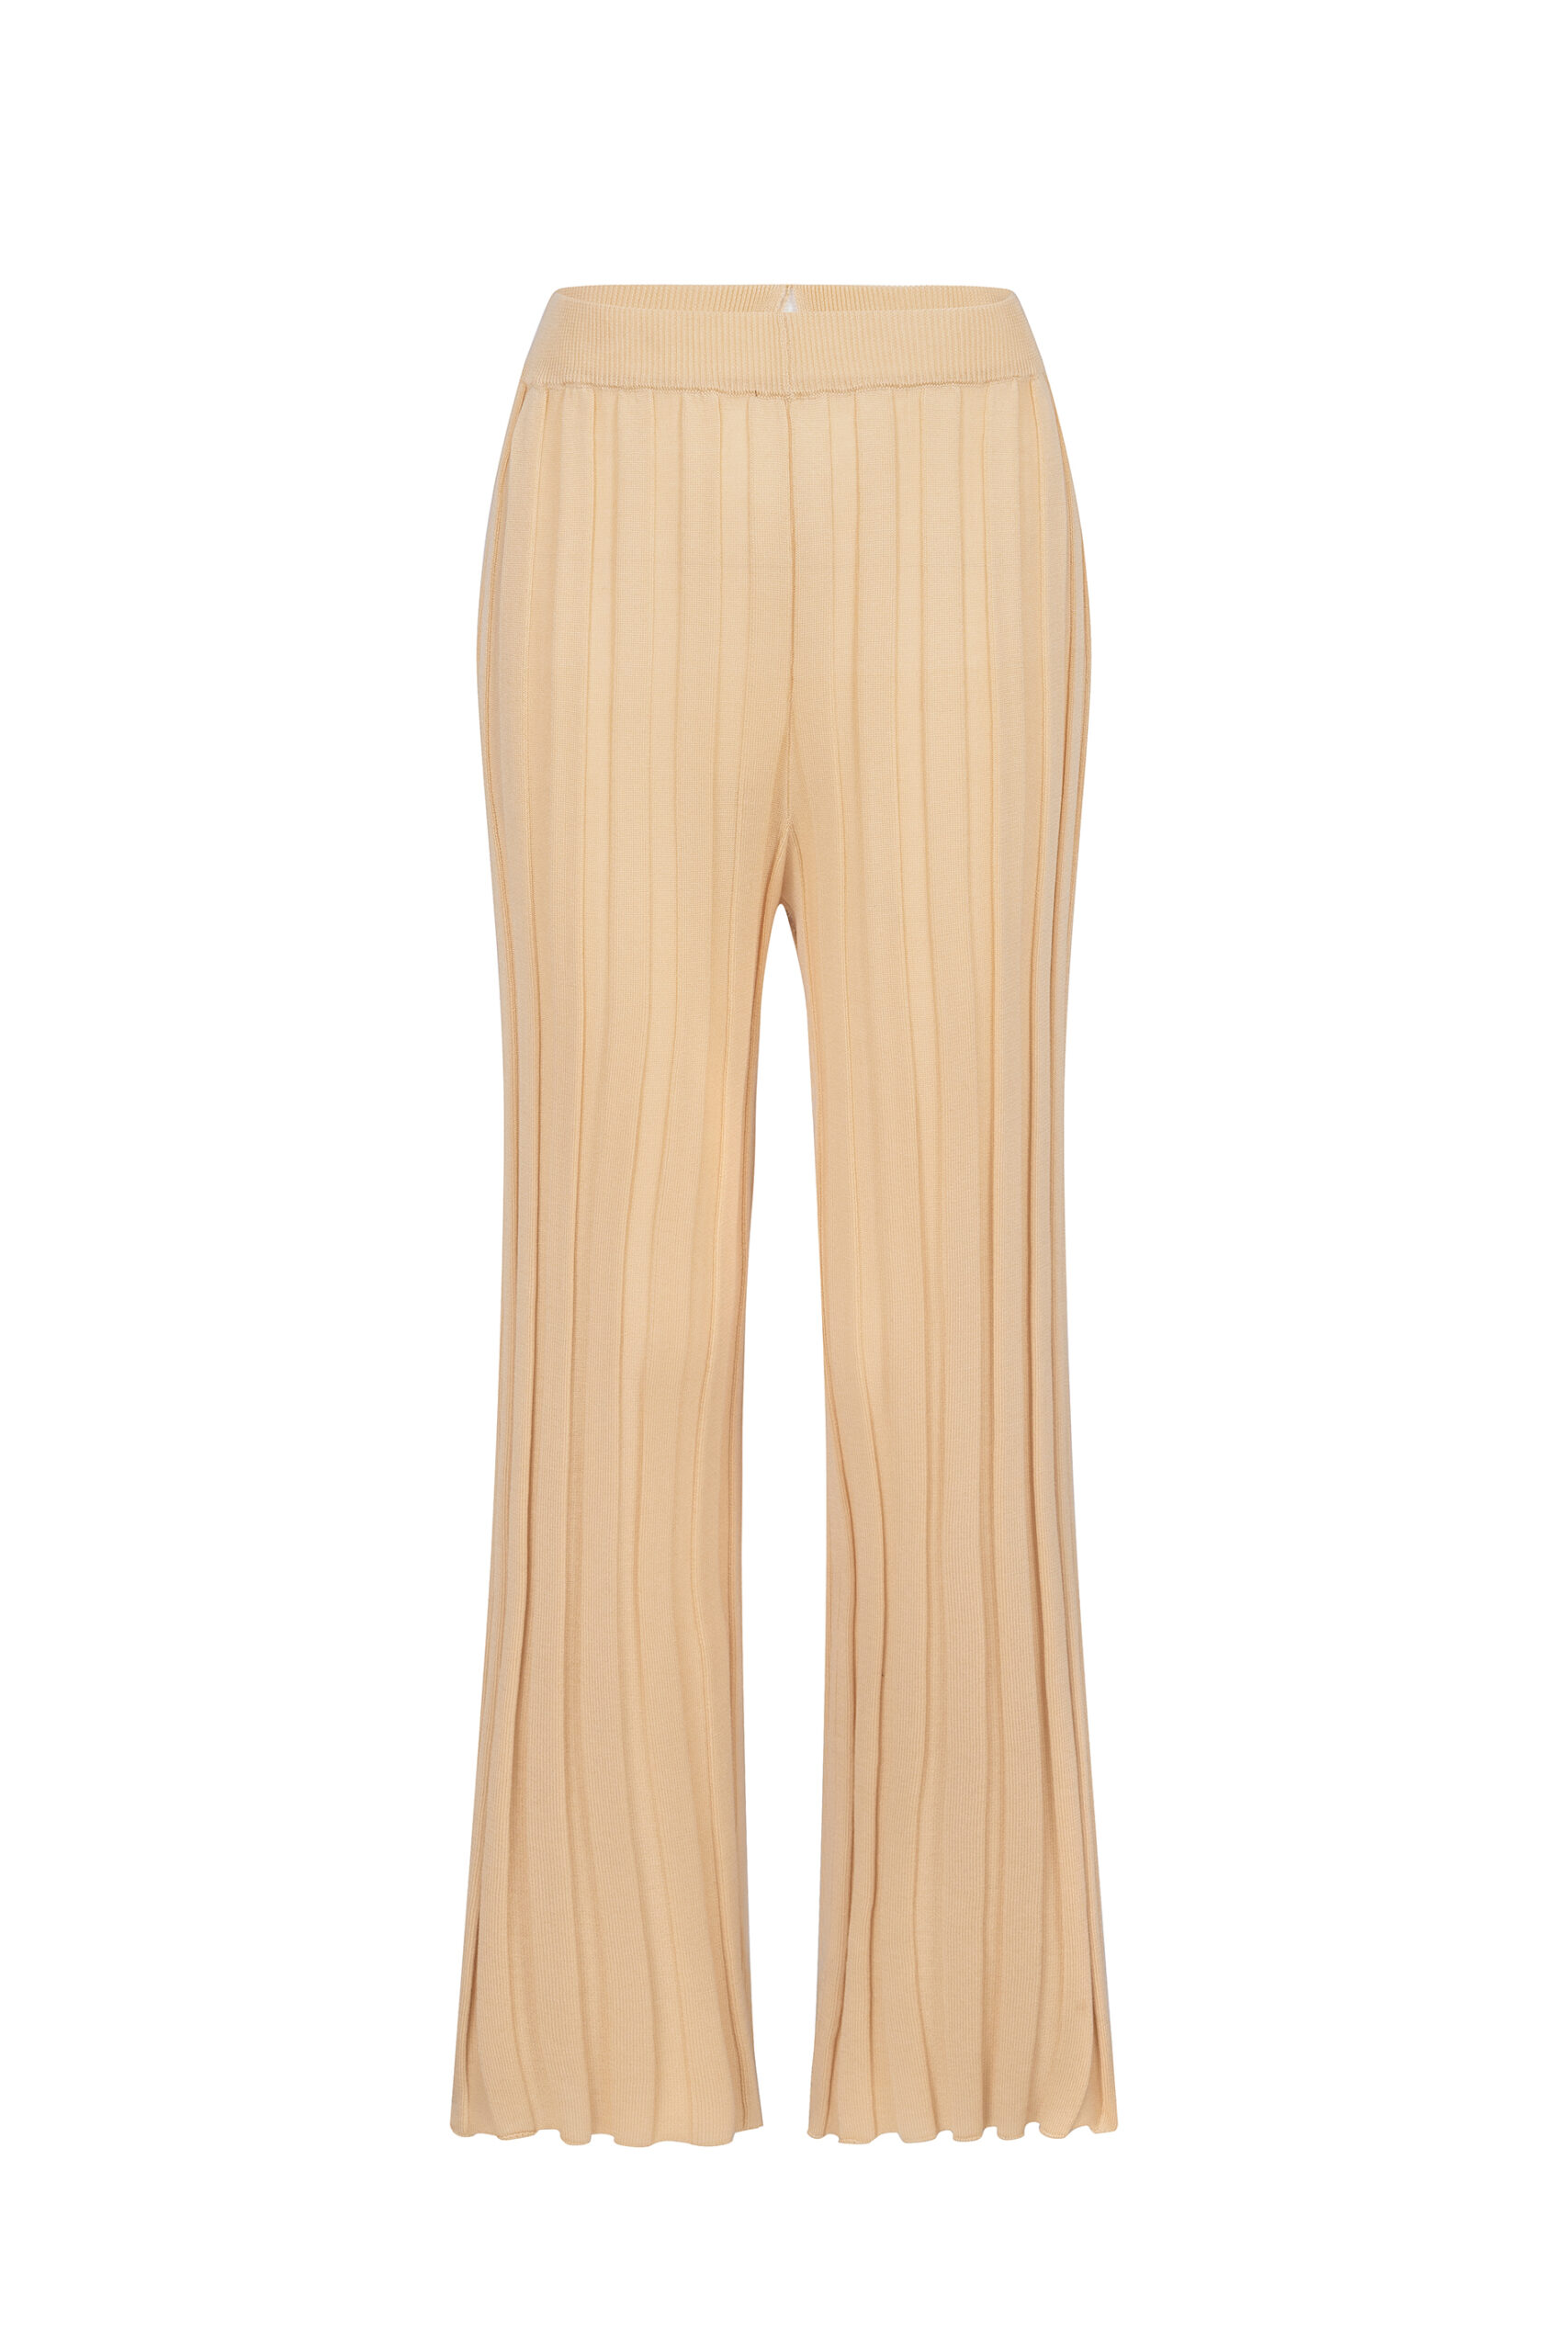 Giselle knitted trousers- Peach - Viktoria Chan